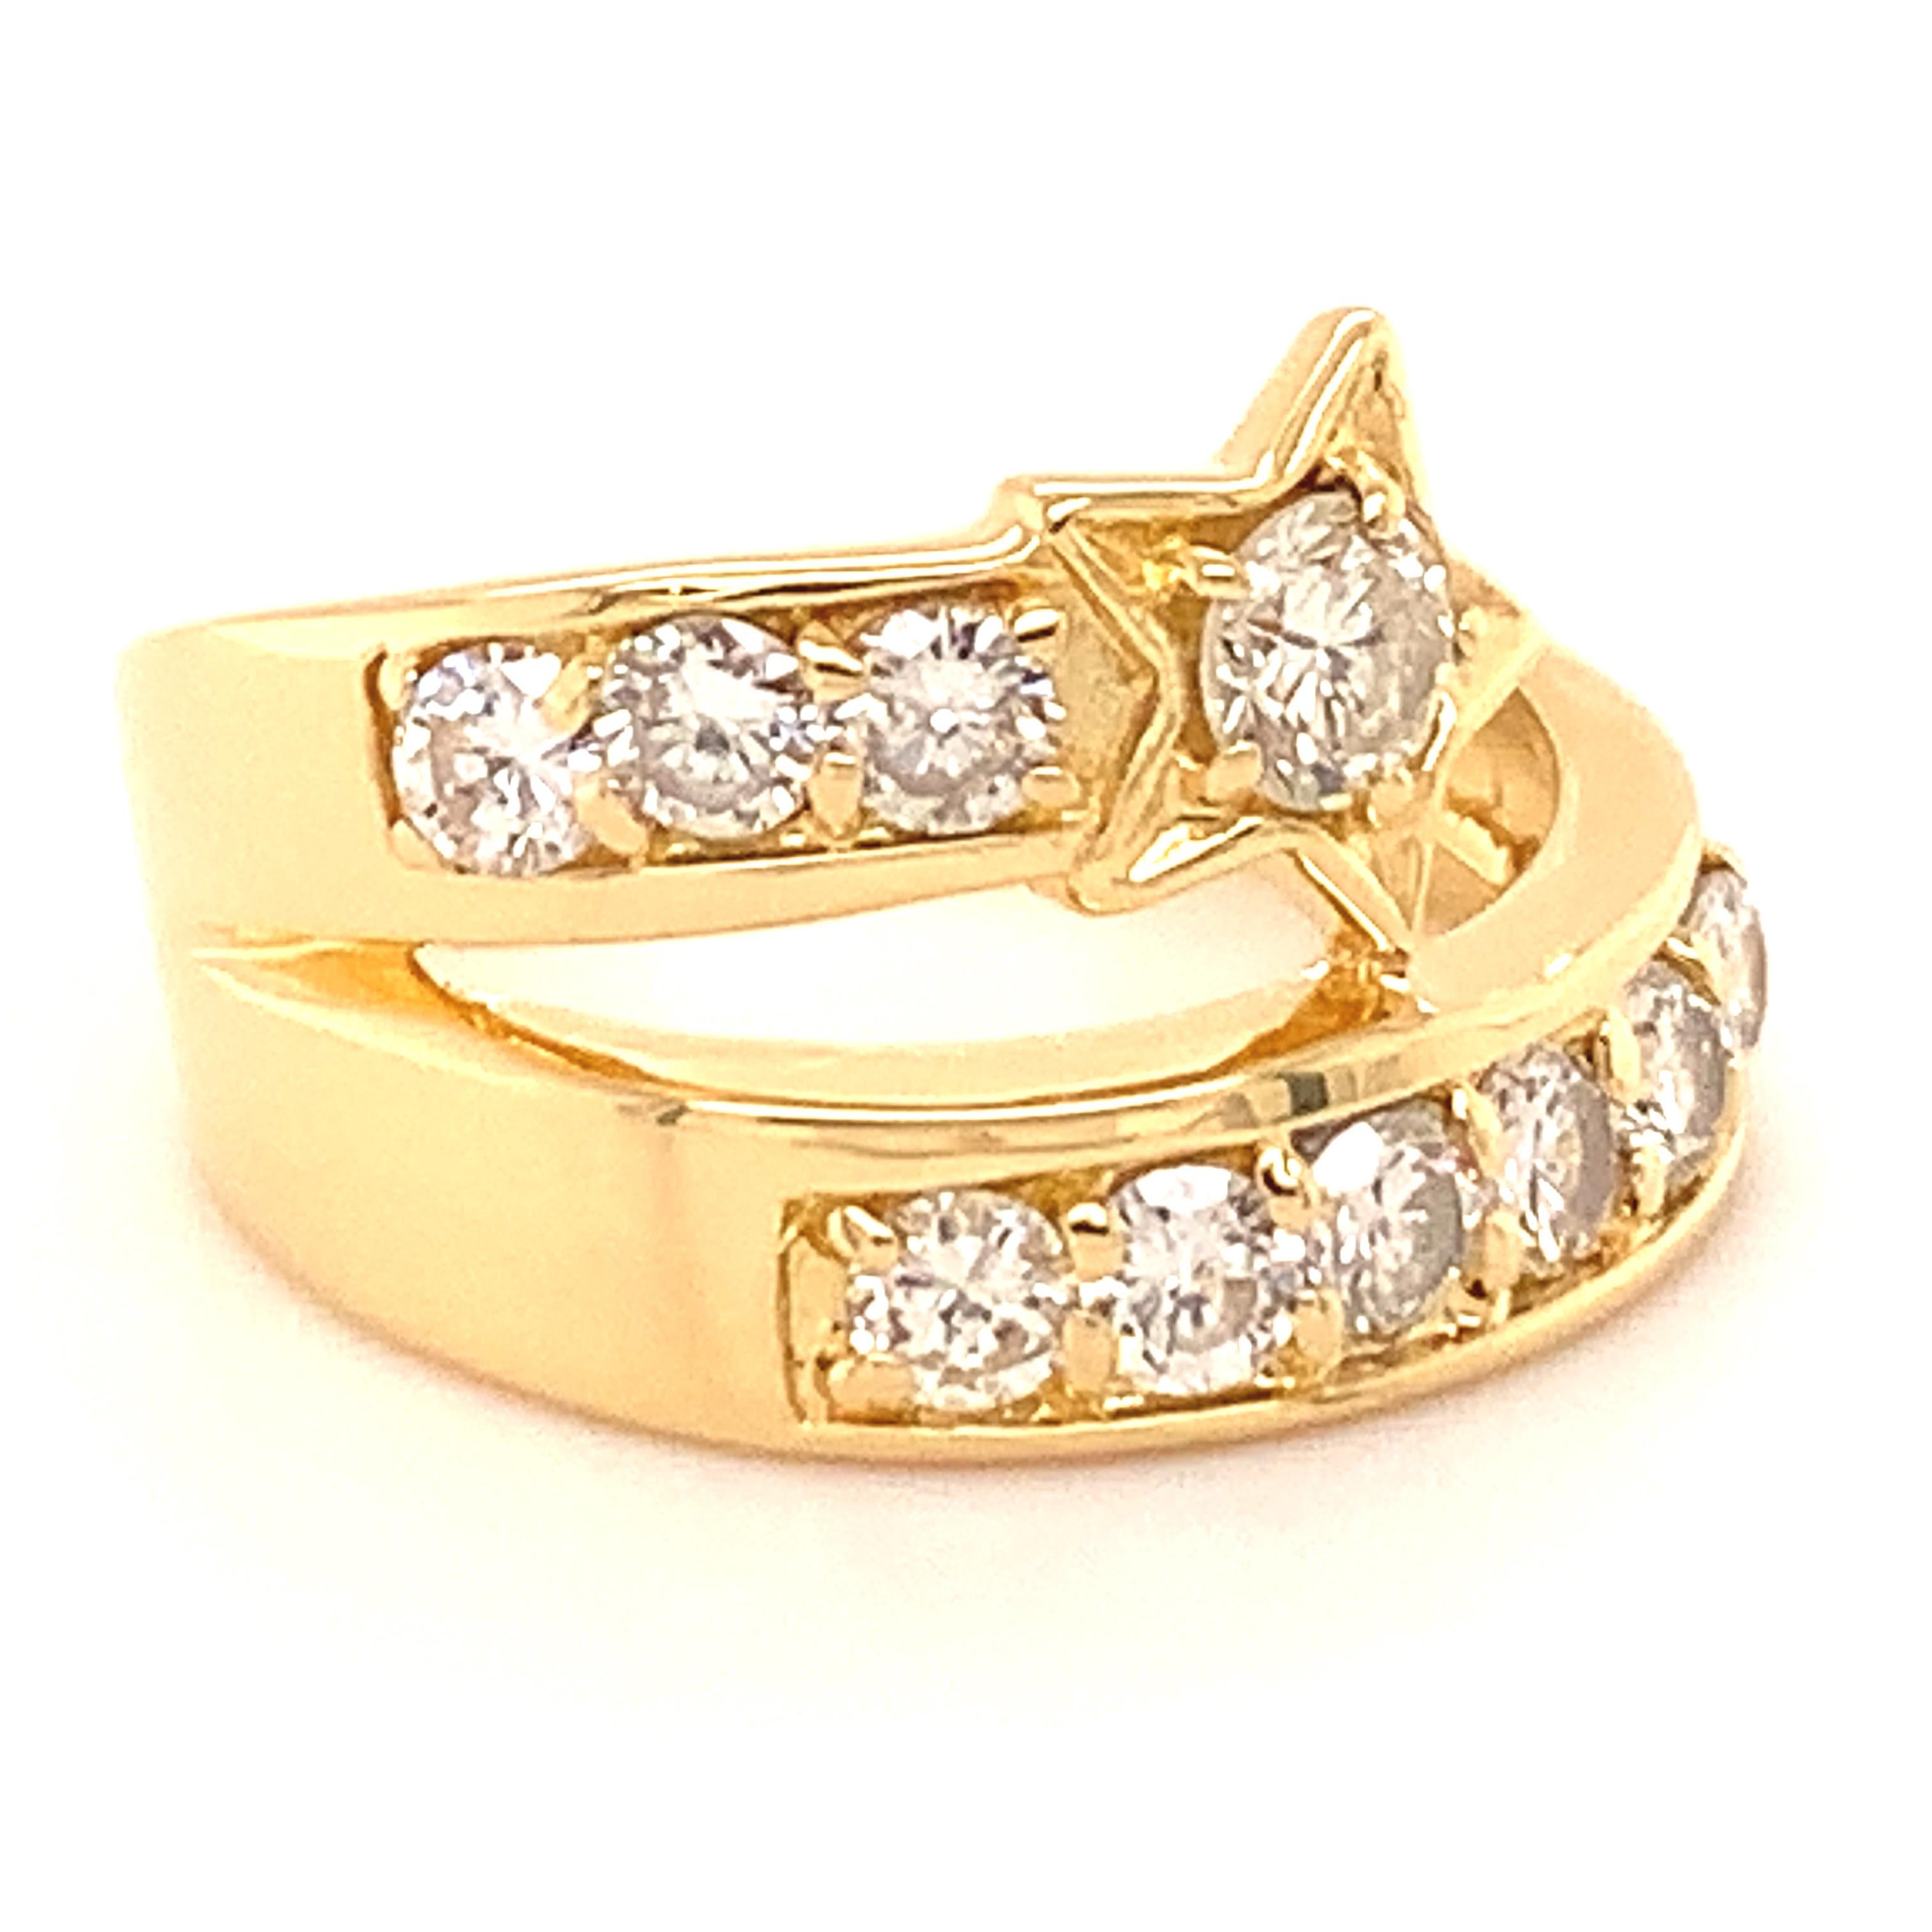 Gold and Diamond Shooting Ring In Excellent Condition For Sale In New York, NY